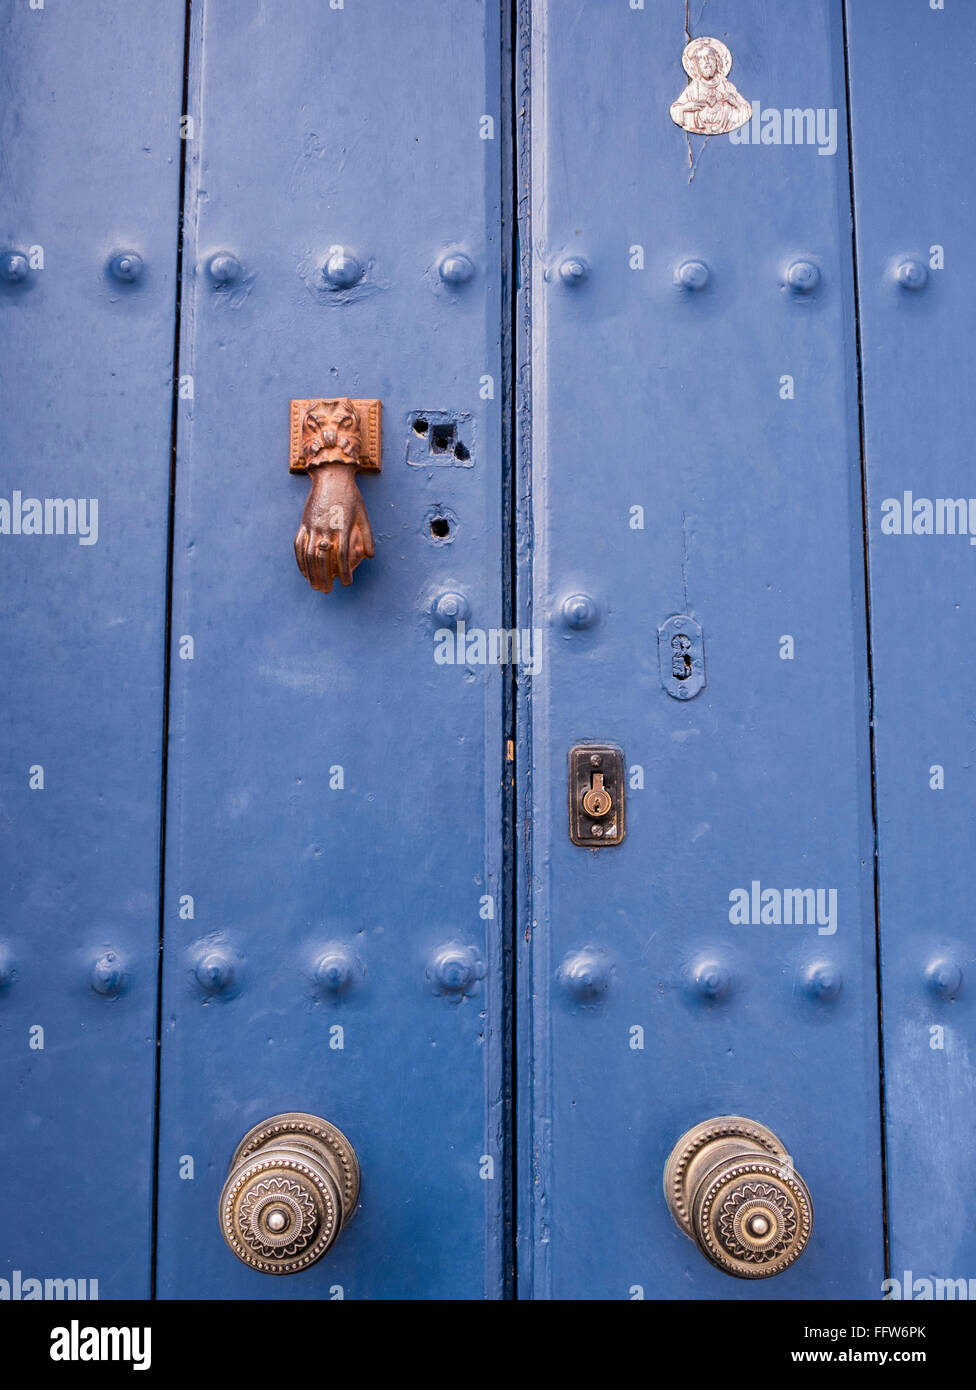 Front Door, Blue, panelled, with hand shaped knocker, a pair of door knobs, a religious symbol and a euro lock, Frigiliana, Malaga, Andalusia, Spain. Stock Photo